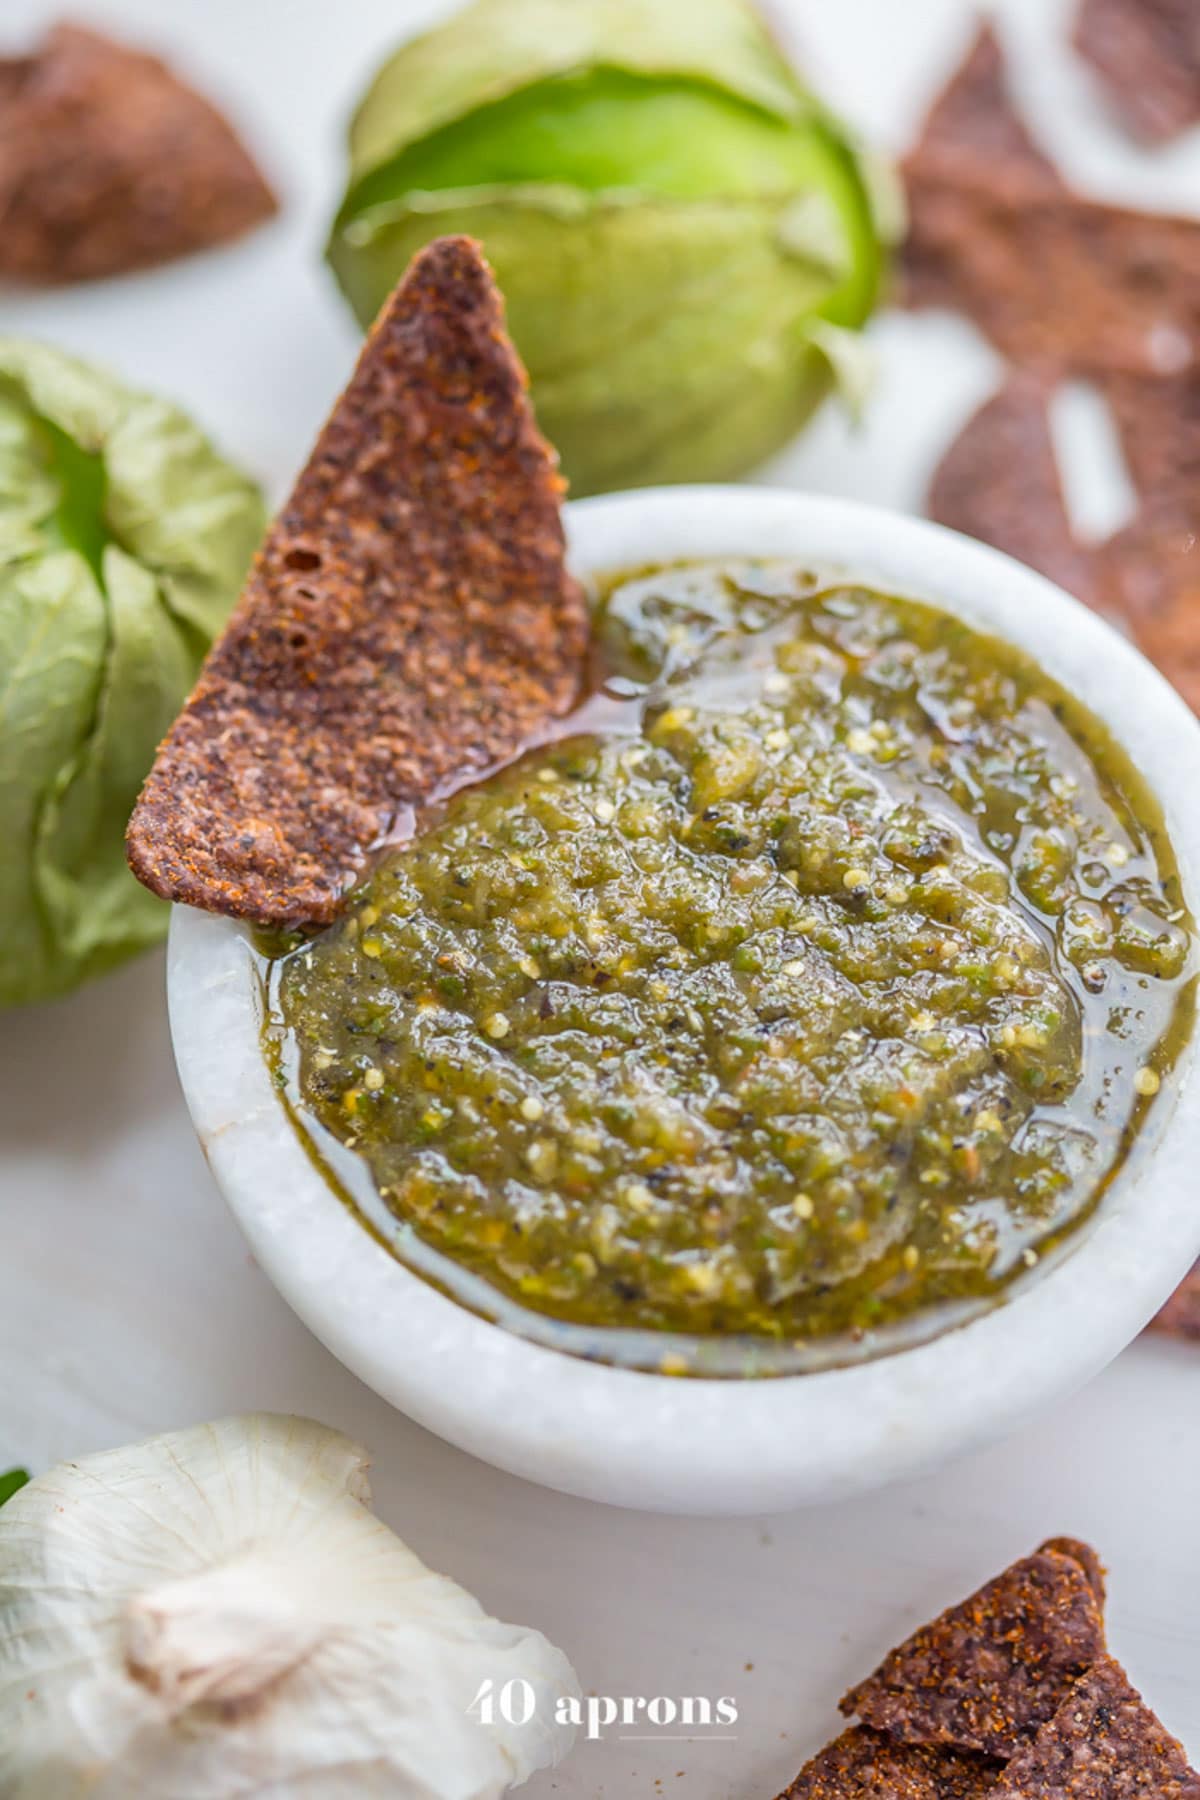 A bowl of green roasted salsa verde with a blue corn tortilla chip resting in the salsa.